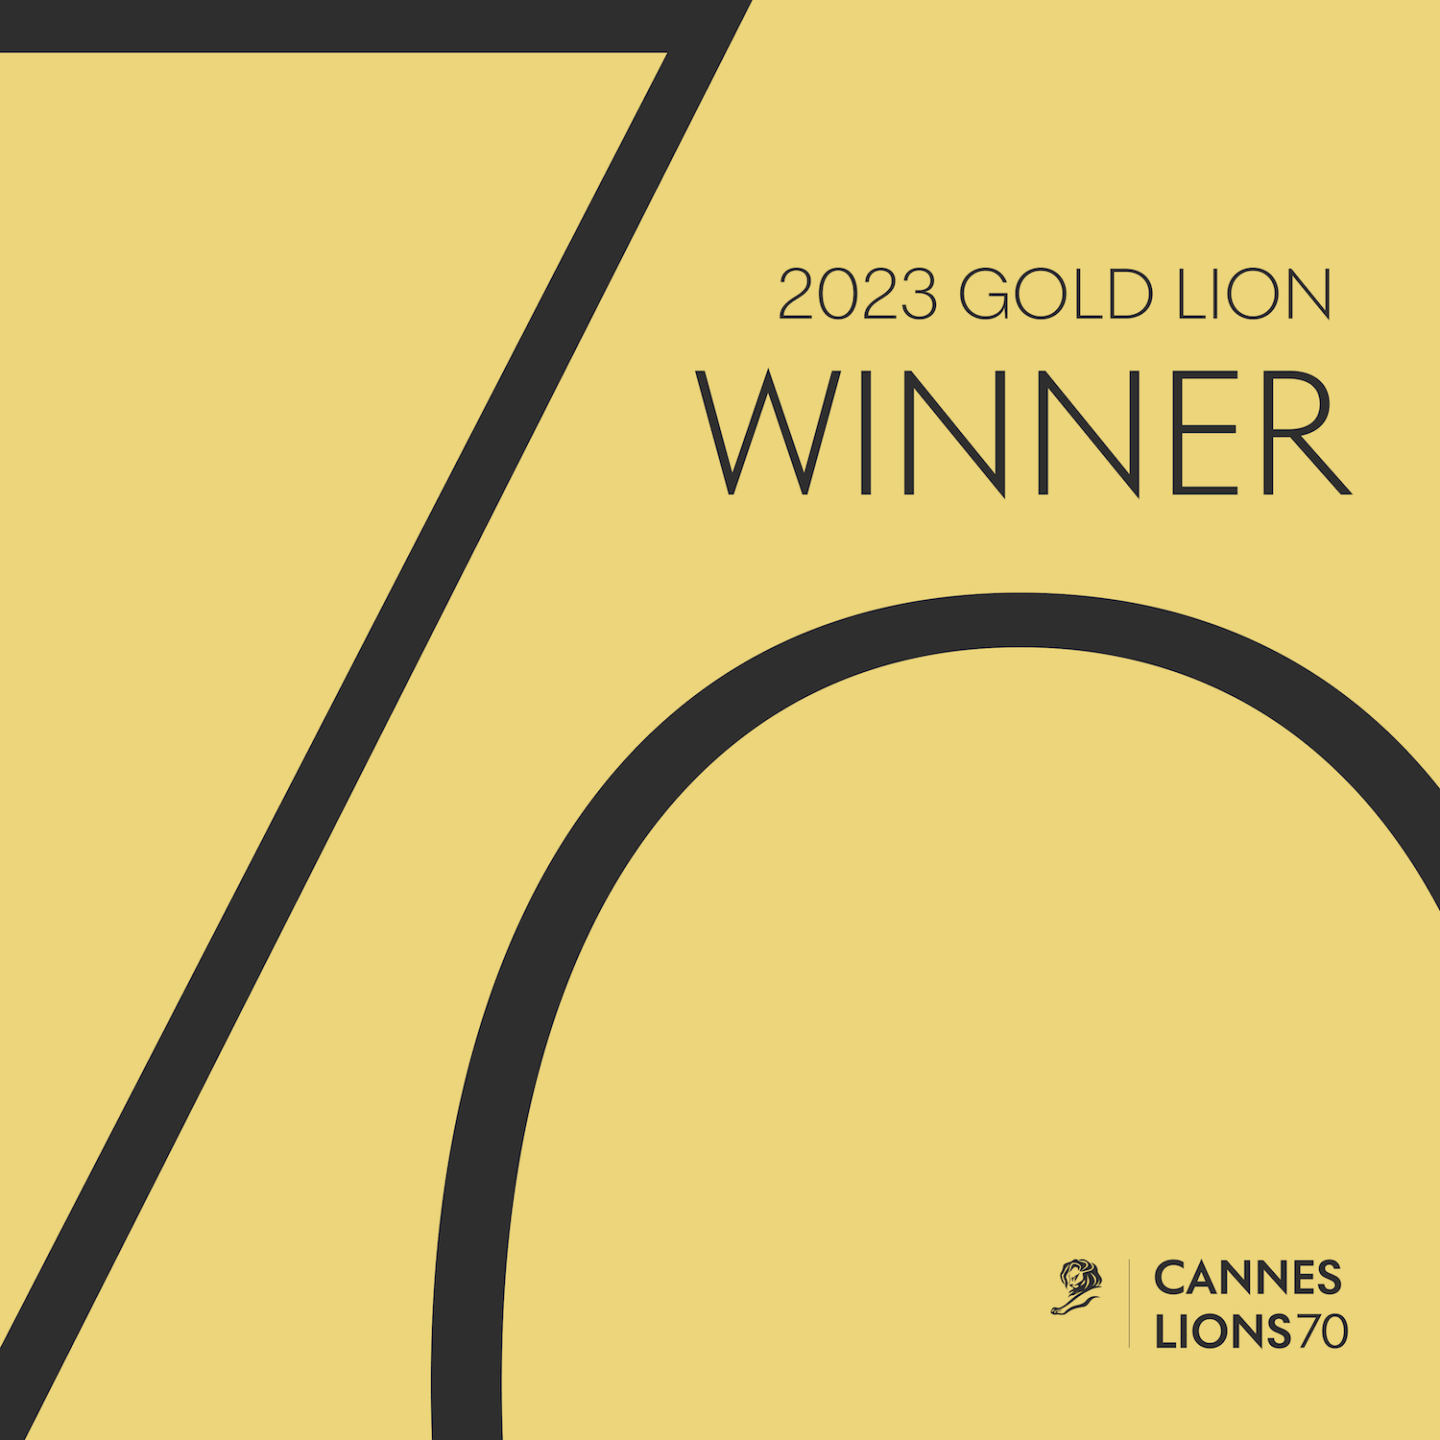 Cannes Lions: Serious Games Blending Monopoly & Google Maps Wins Gold